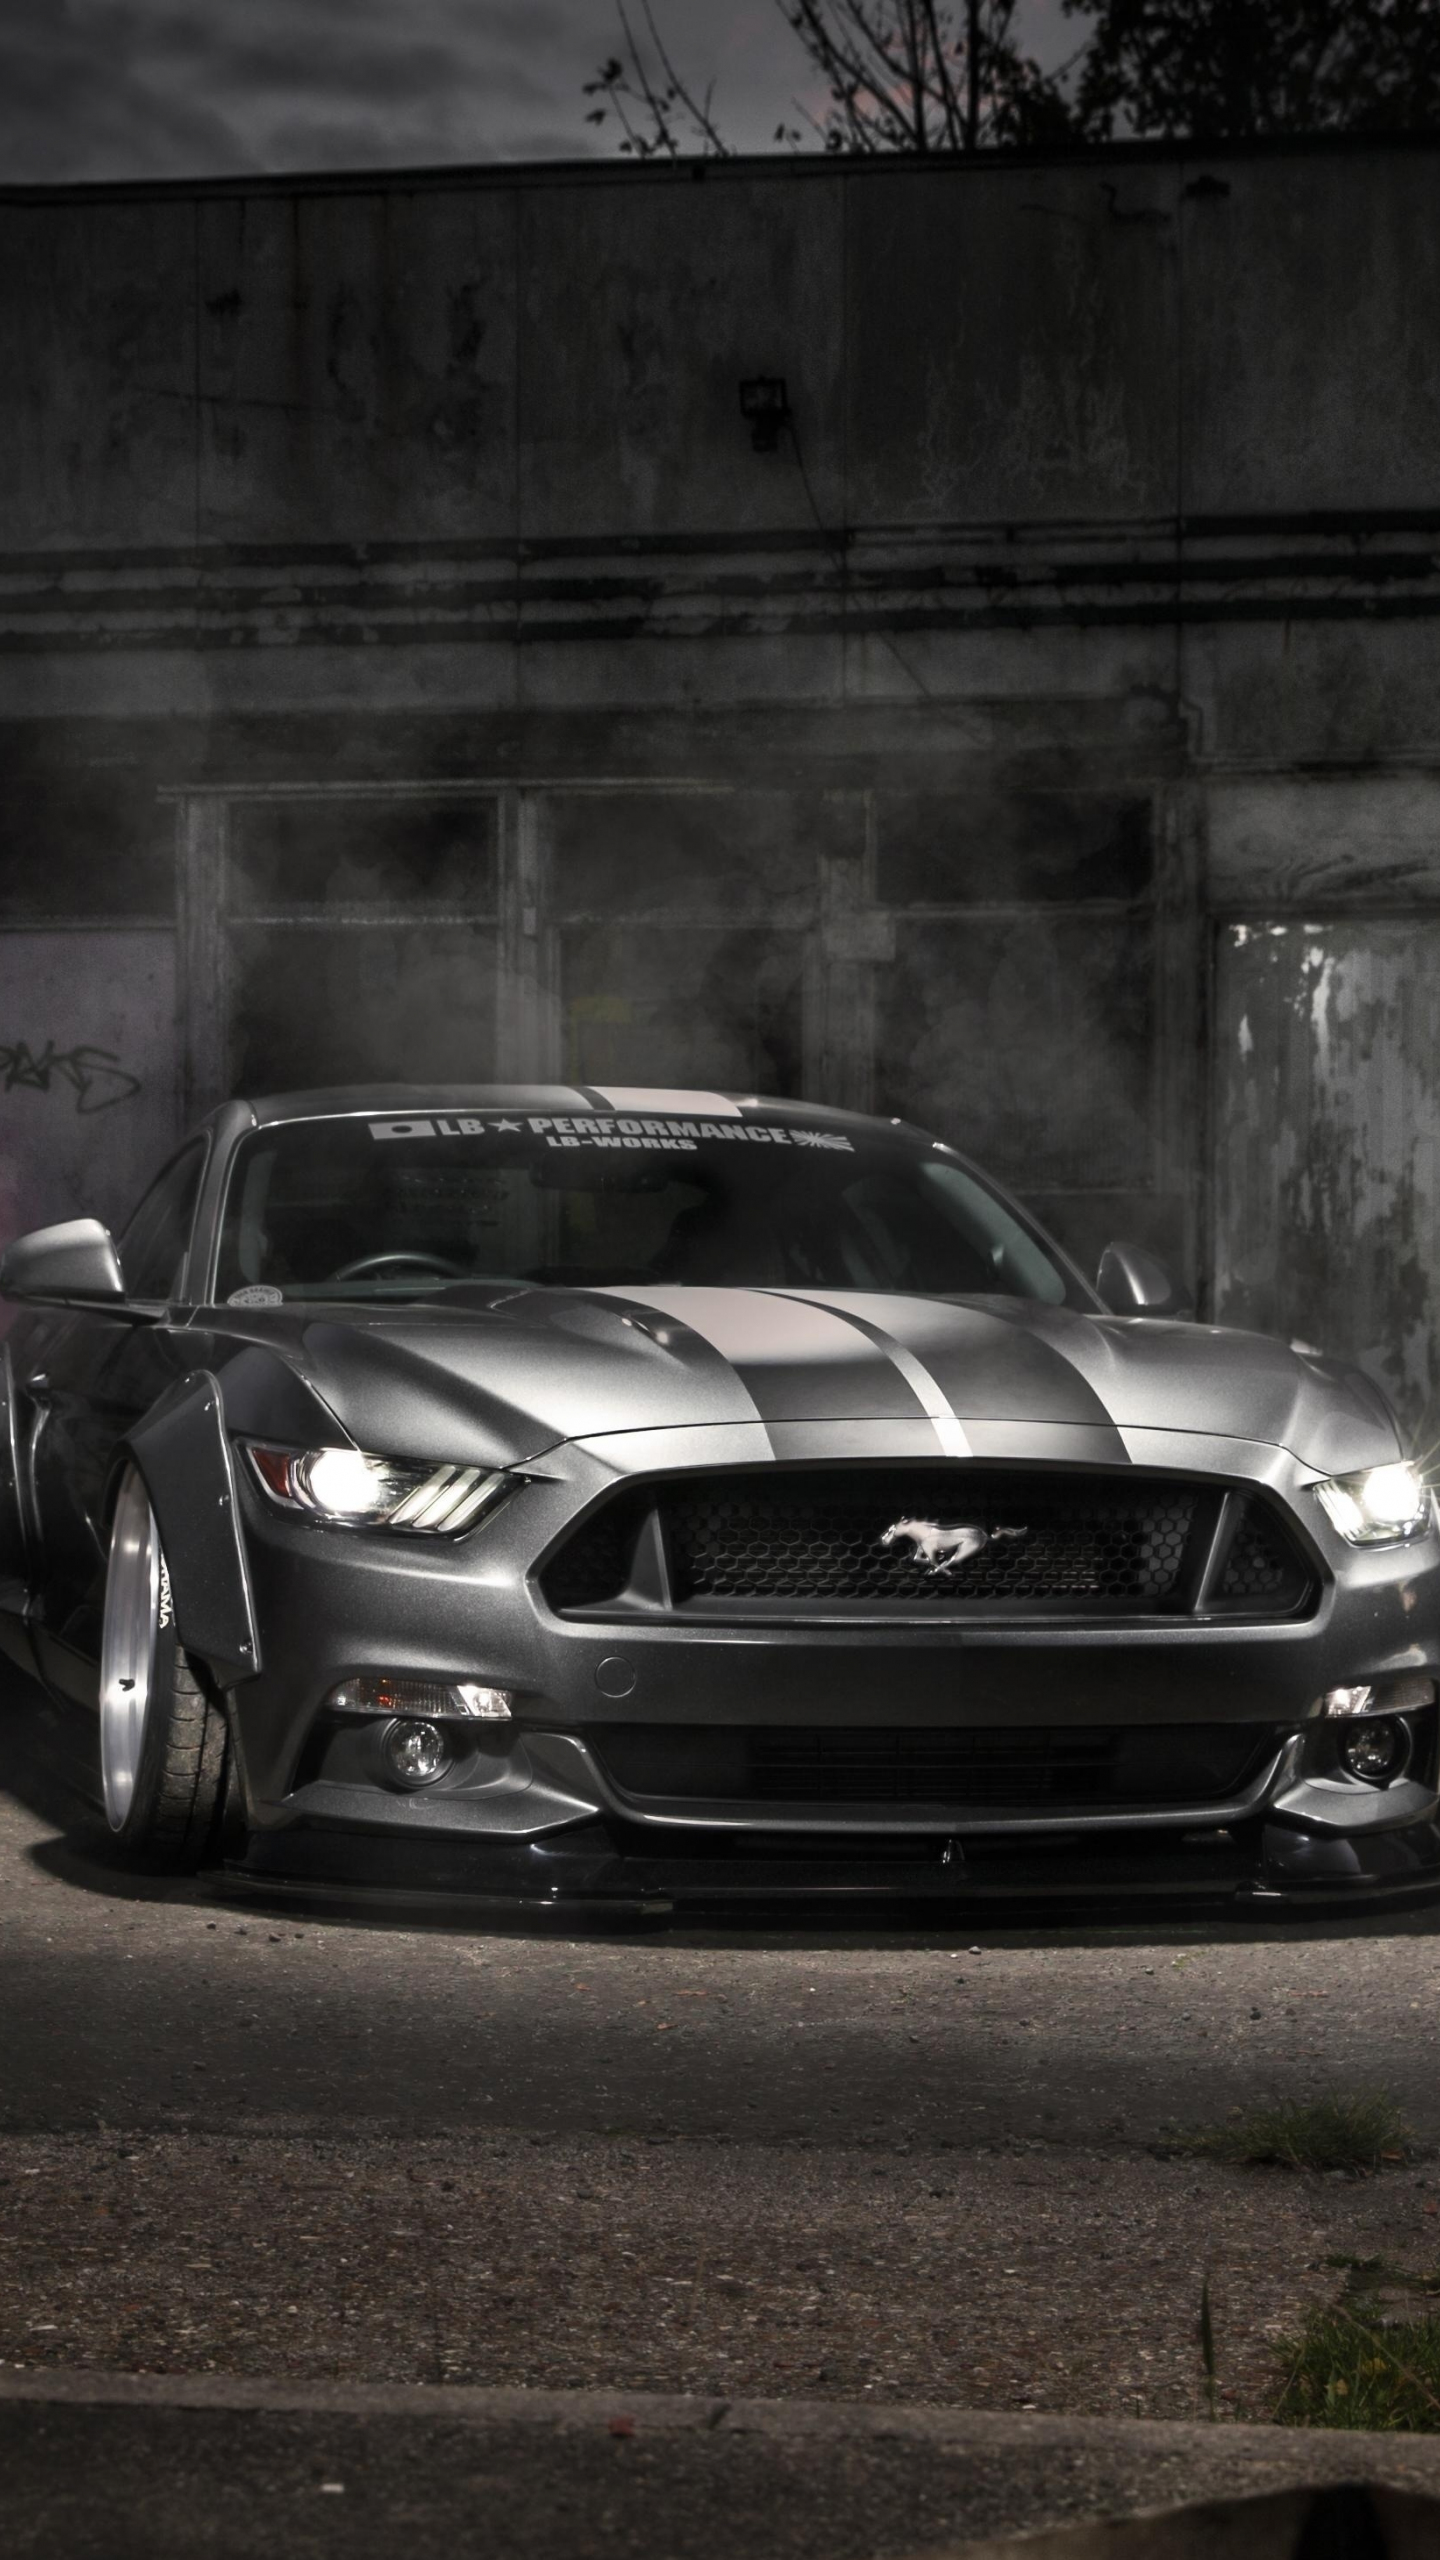 Download wallpaper 1440x2560 mustang ford, silver, muscle car, qhd samsung  galaxy s6, s7, edge, note, lg g4, 1440x2560 hd background, 20623